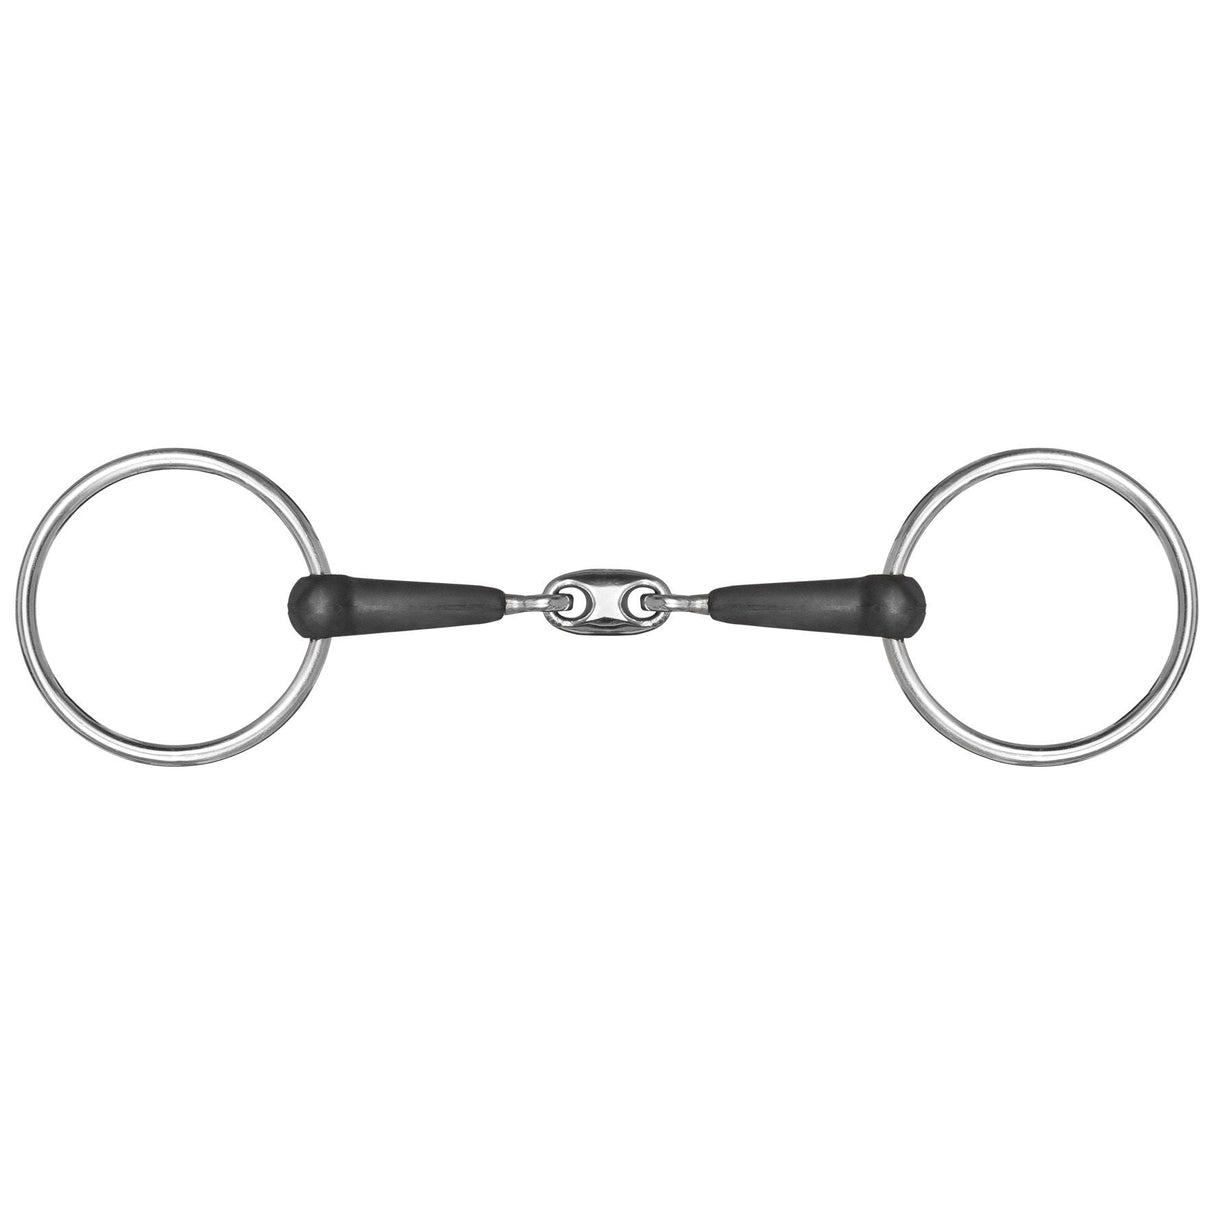 Mackey Double Jointed Rubber Snaffle Bit